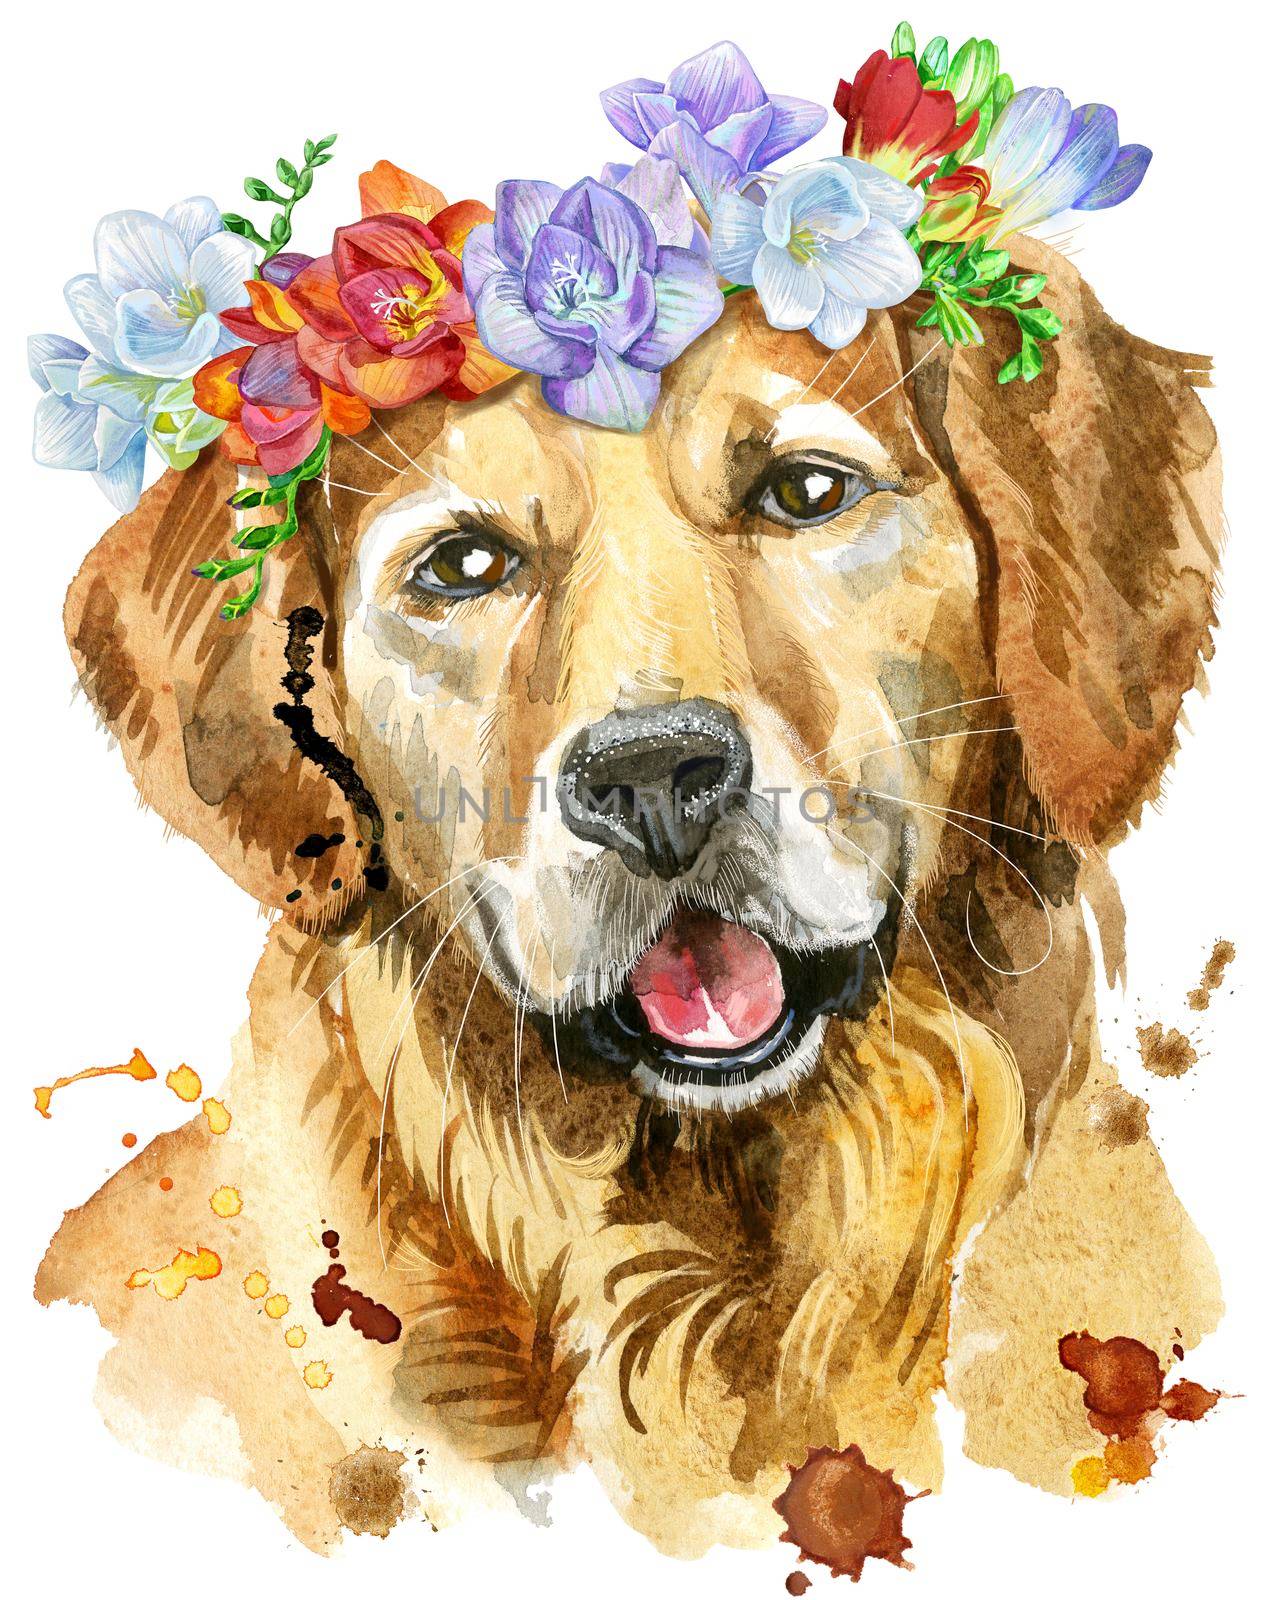 Cute Dog. Dog T-shirt graphics. watercolor golden retriever illustration with freesia wreath